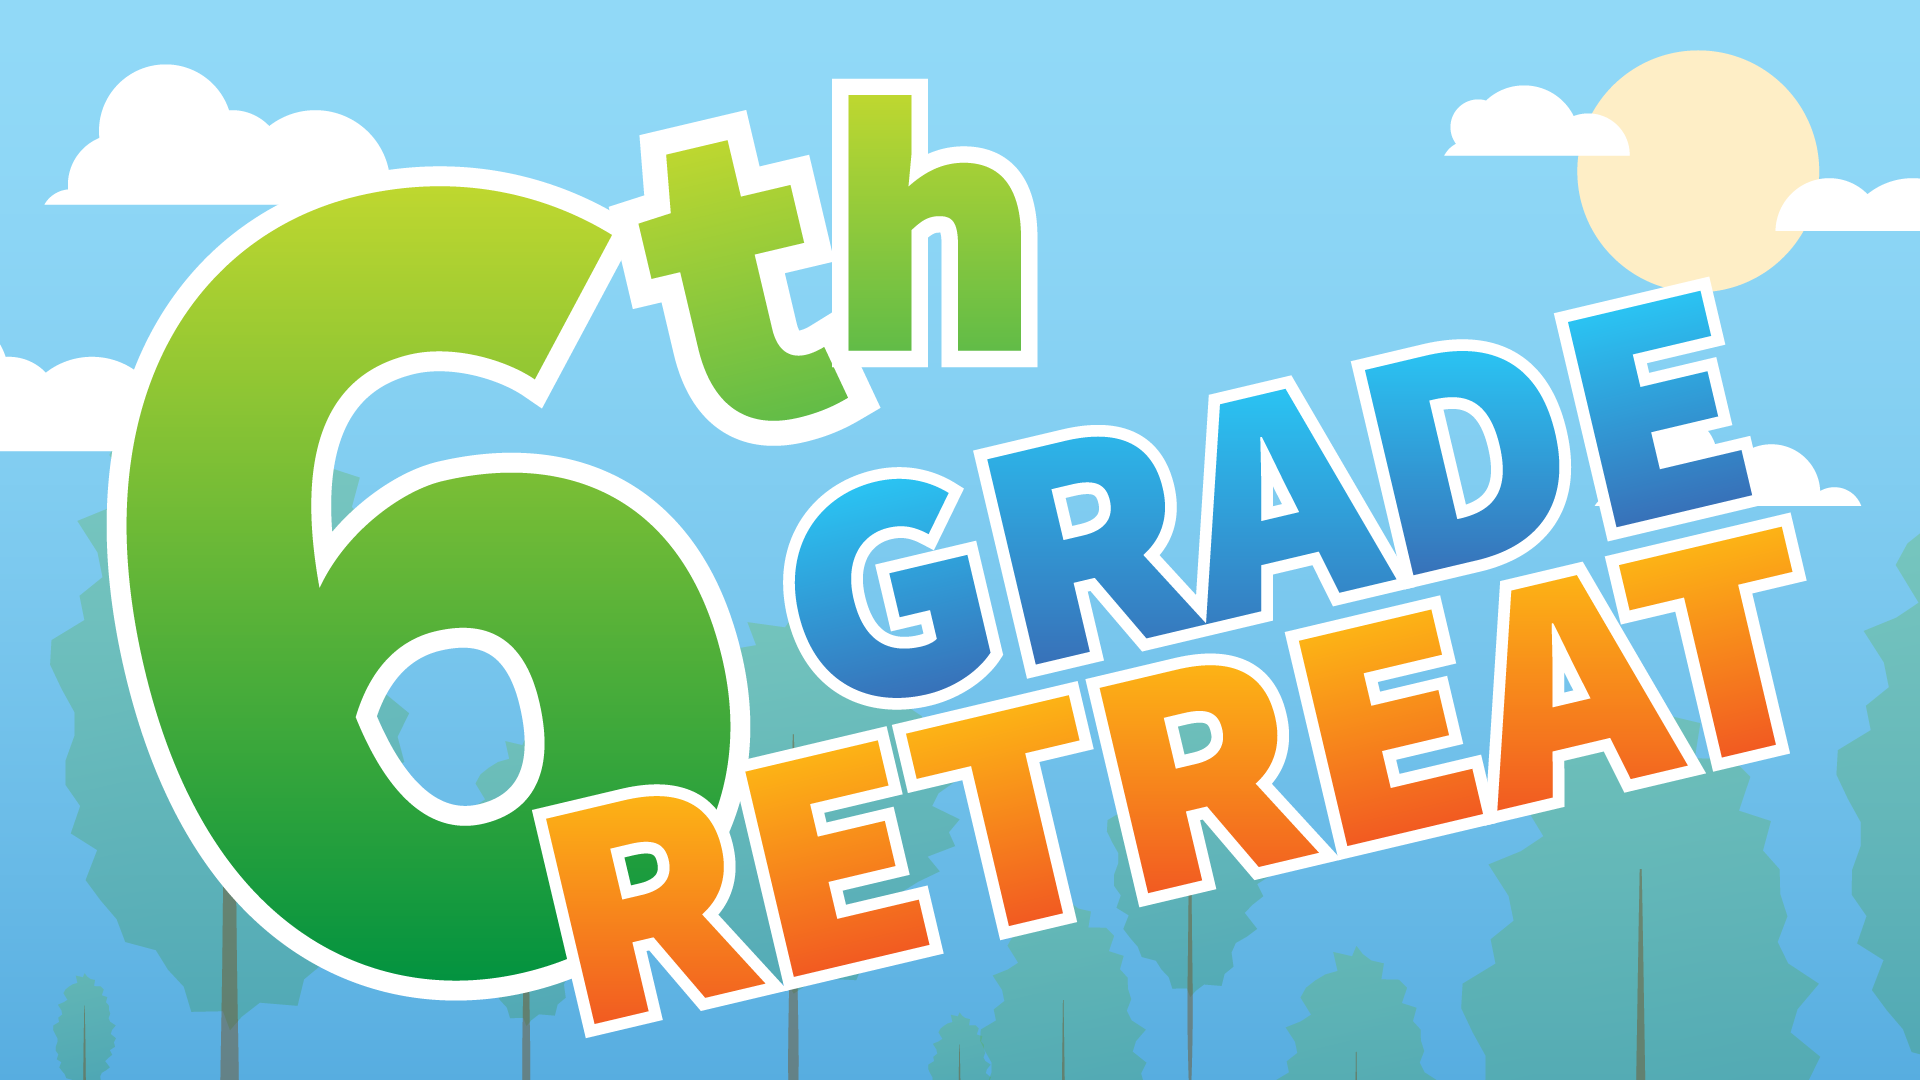 Join us for a 6th Grade Retreat!